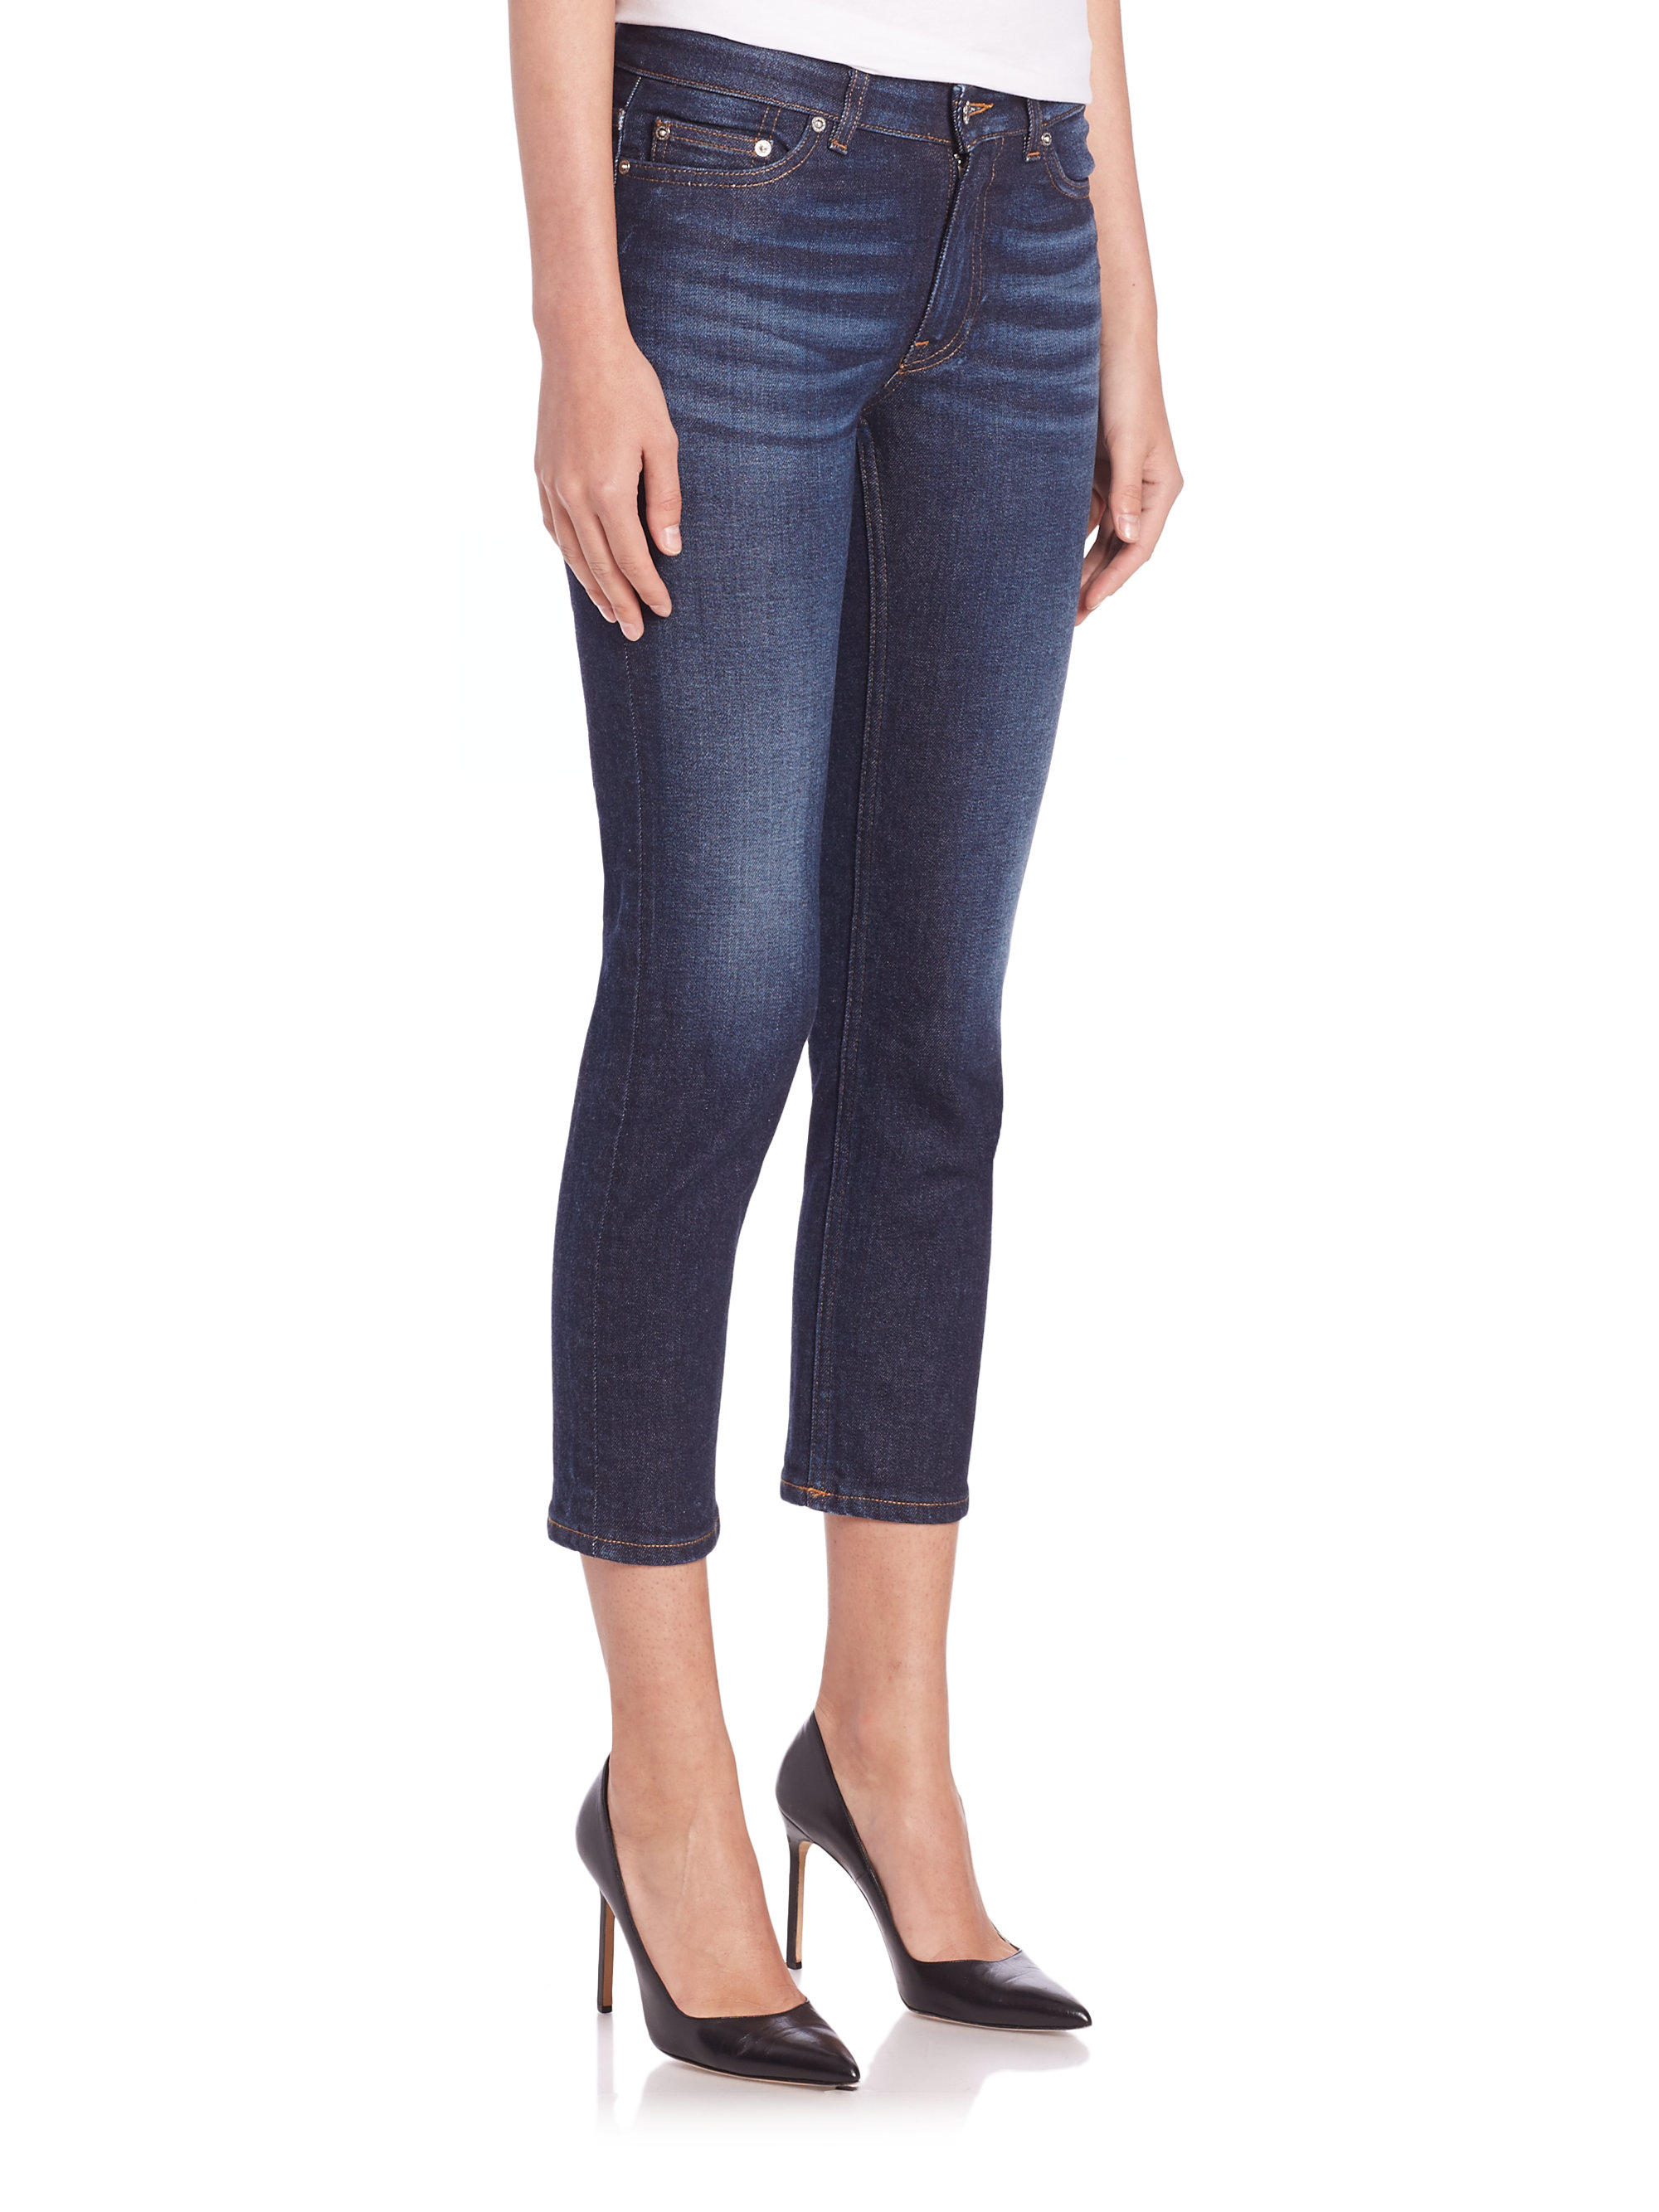 Lyst - Acne Studios Row Cropped Skinny Jeans in Blue